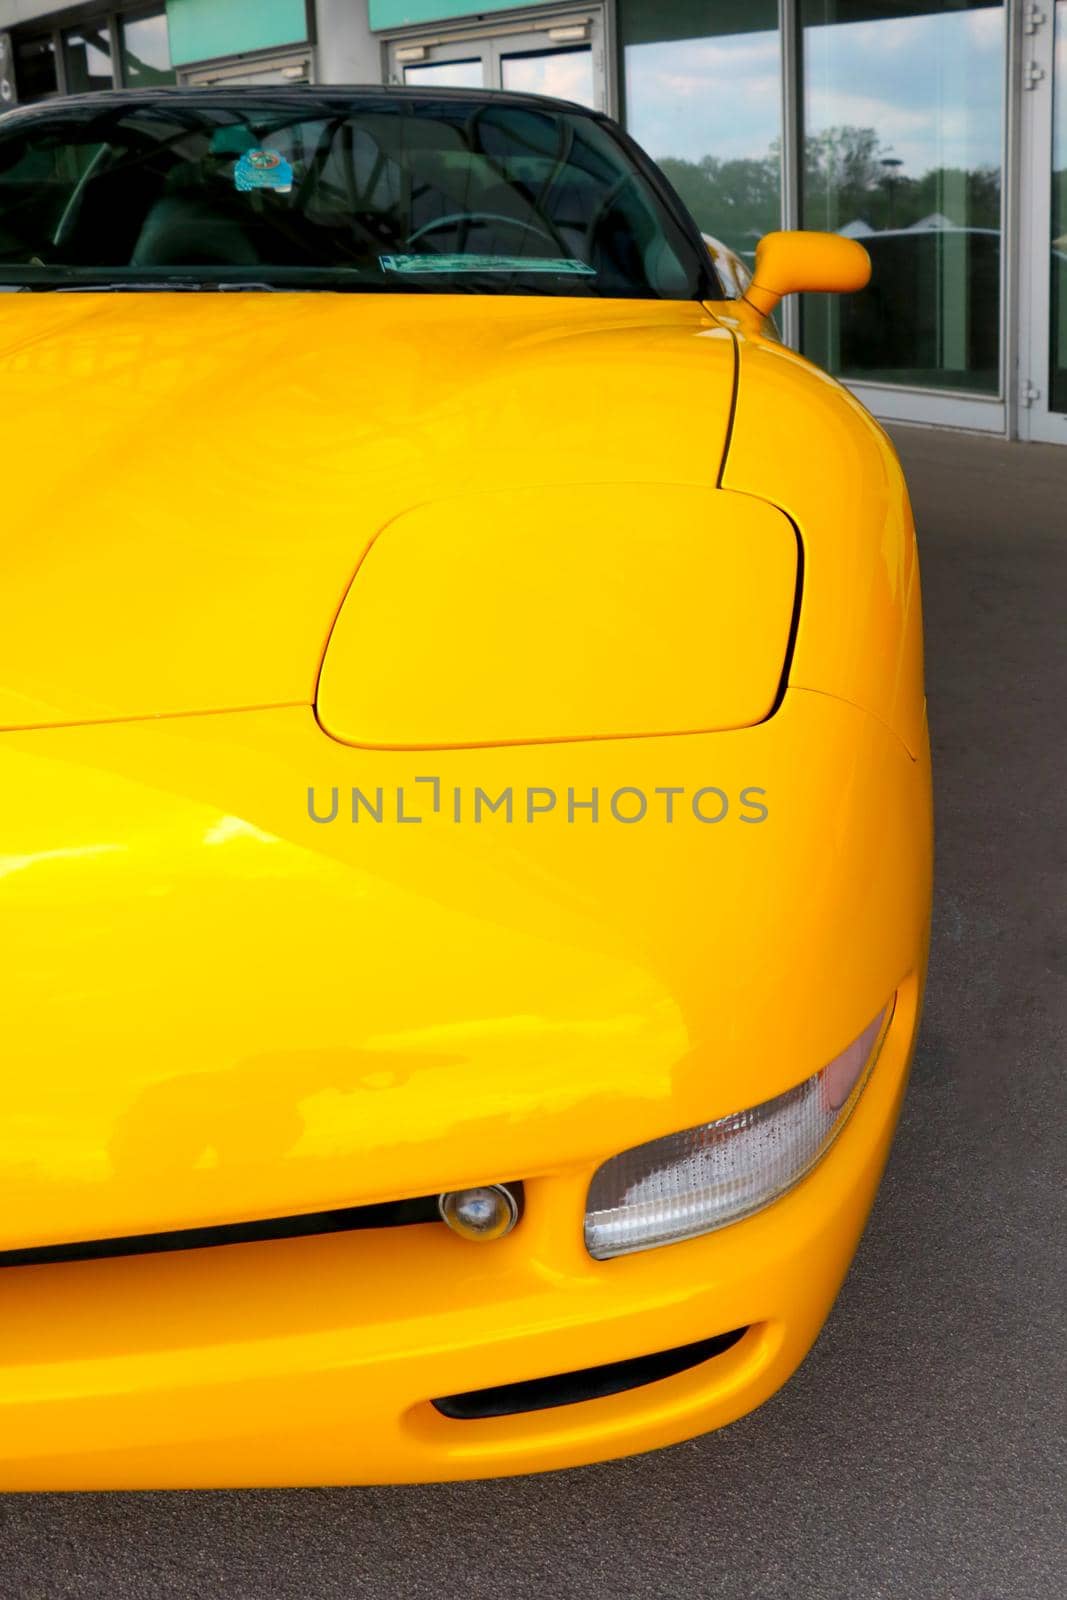 Wroclaw, Poland, August 22, 2021: view of the yellow fast car. by kip02kas